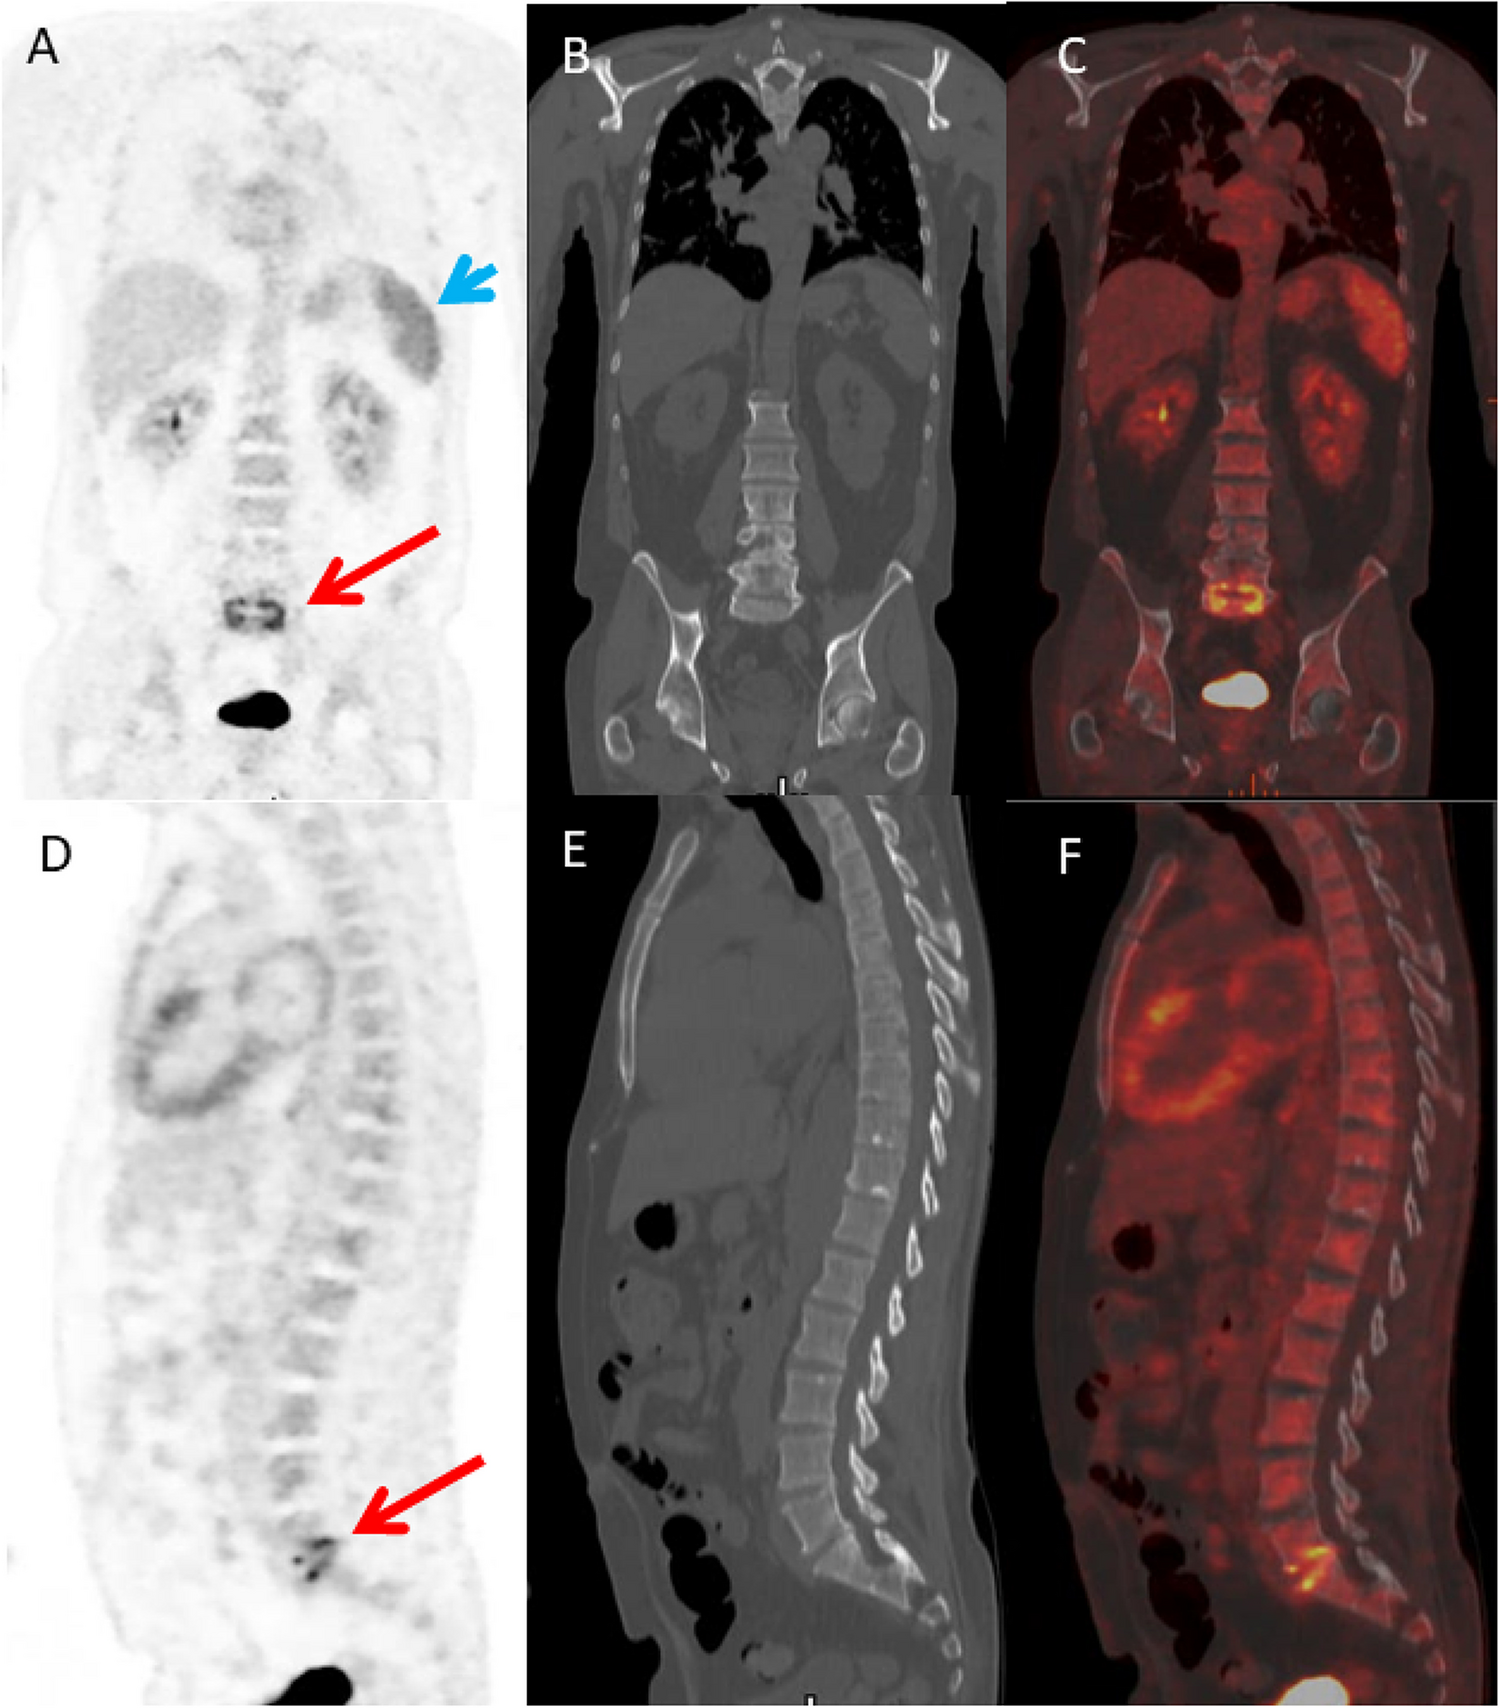 Molecular Imaging Techniques in the Diagnosis and Monitoring of Infectious Diseases